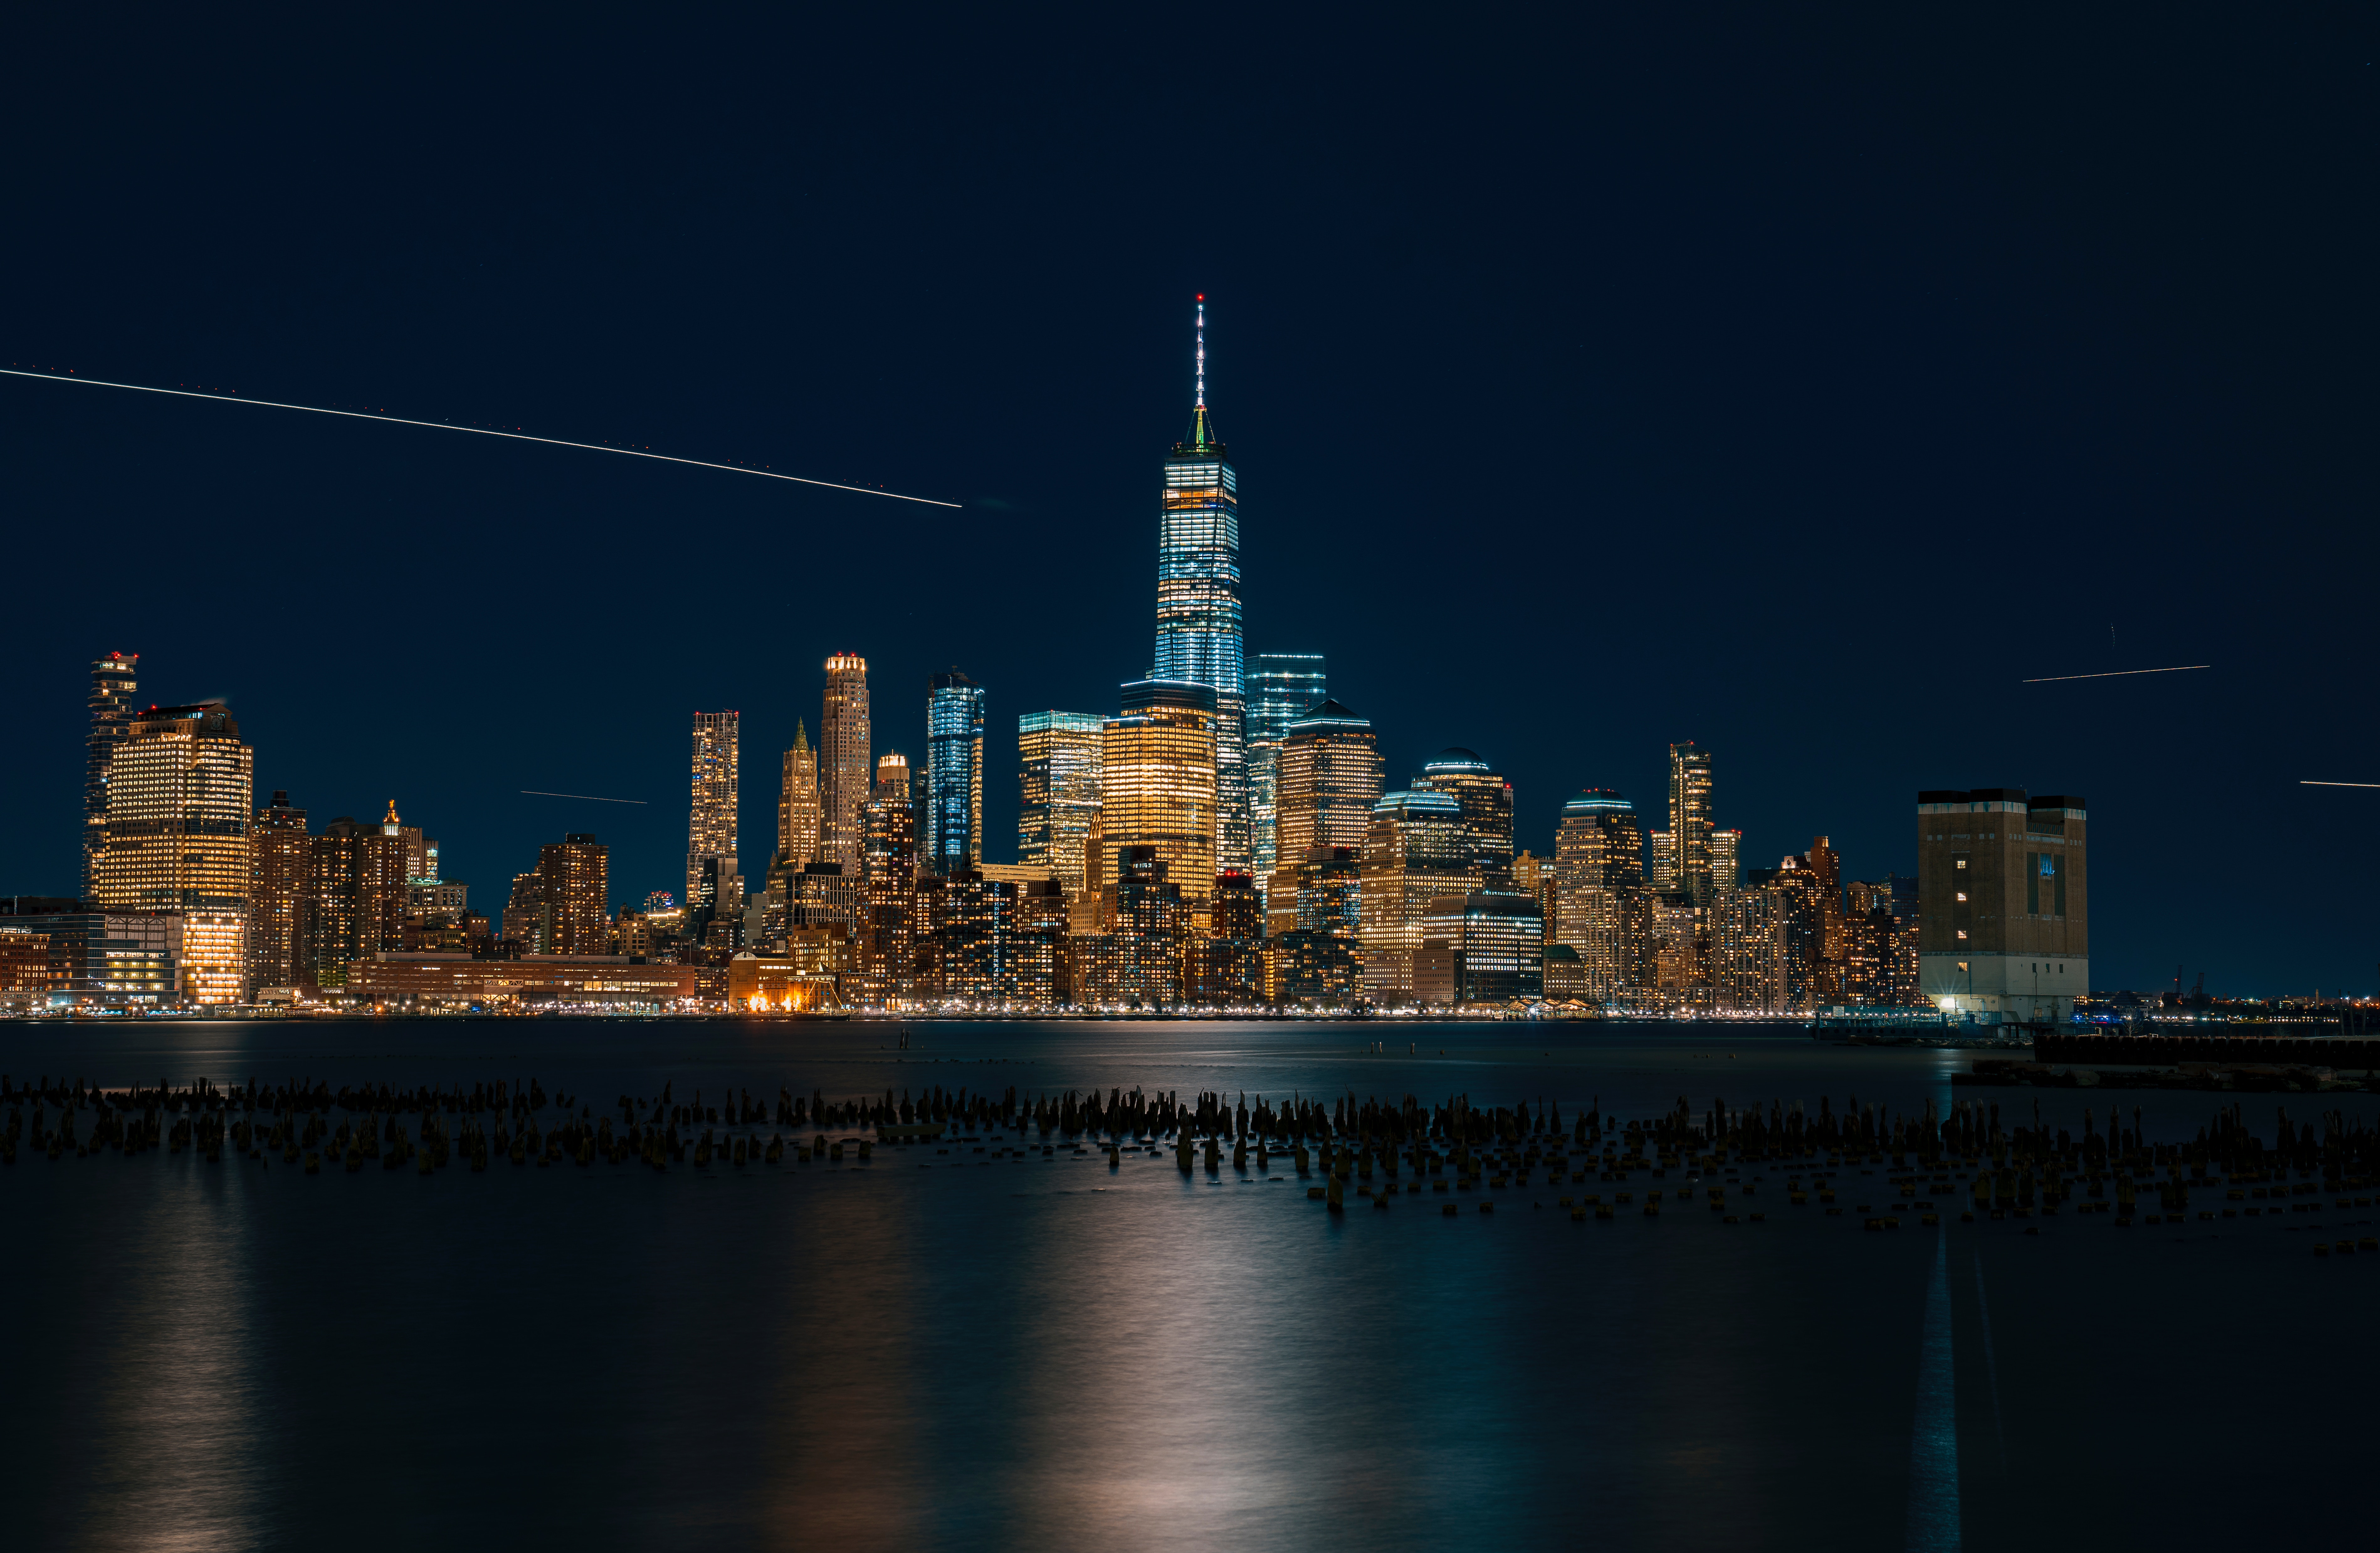 General 7593x4954 city water reflection lights New York City long exposure